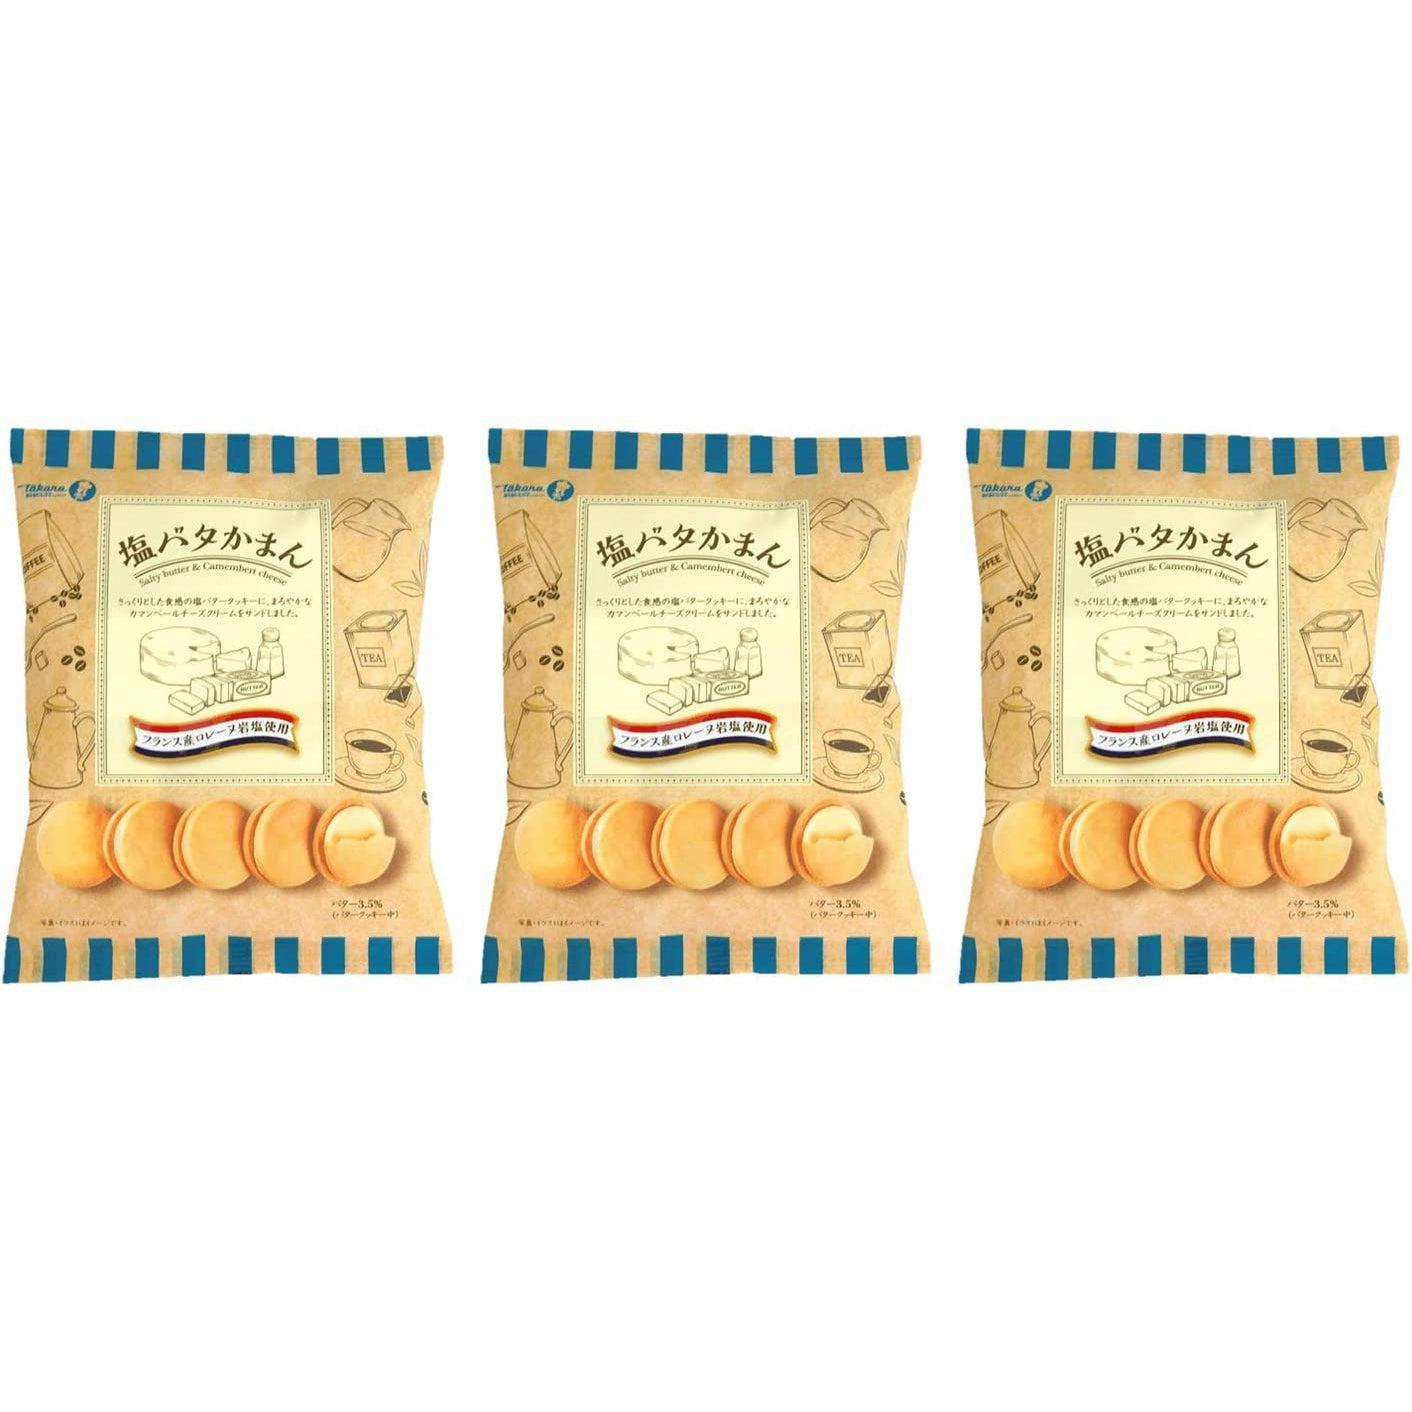 P-1-TKSE-CMBBIS-1:3-Takara Seika Camembert Cheese Filled Salted Butter Sandwich Biscuits 137g (Pack of 3).jpg